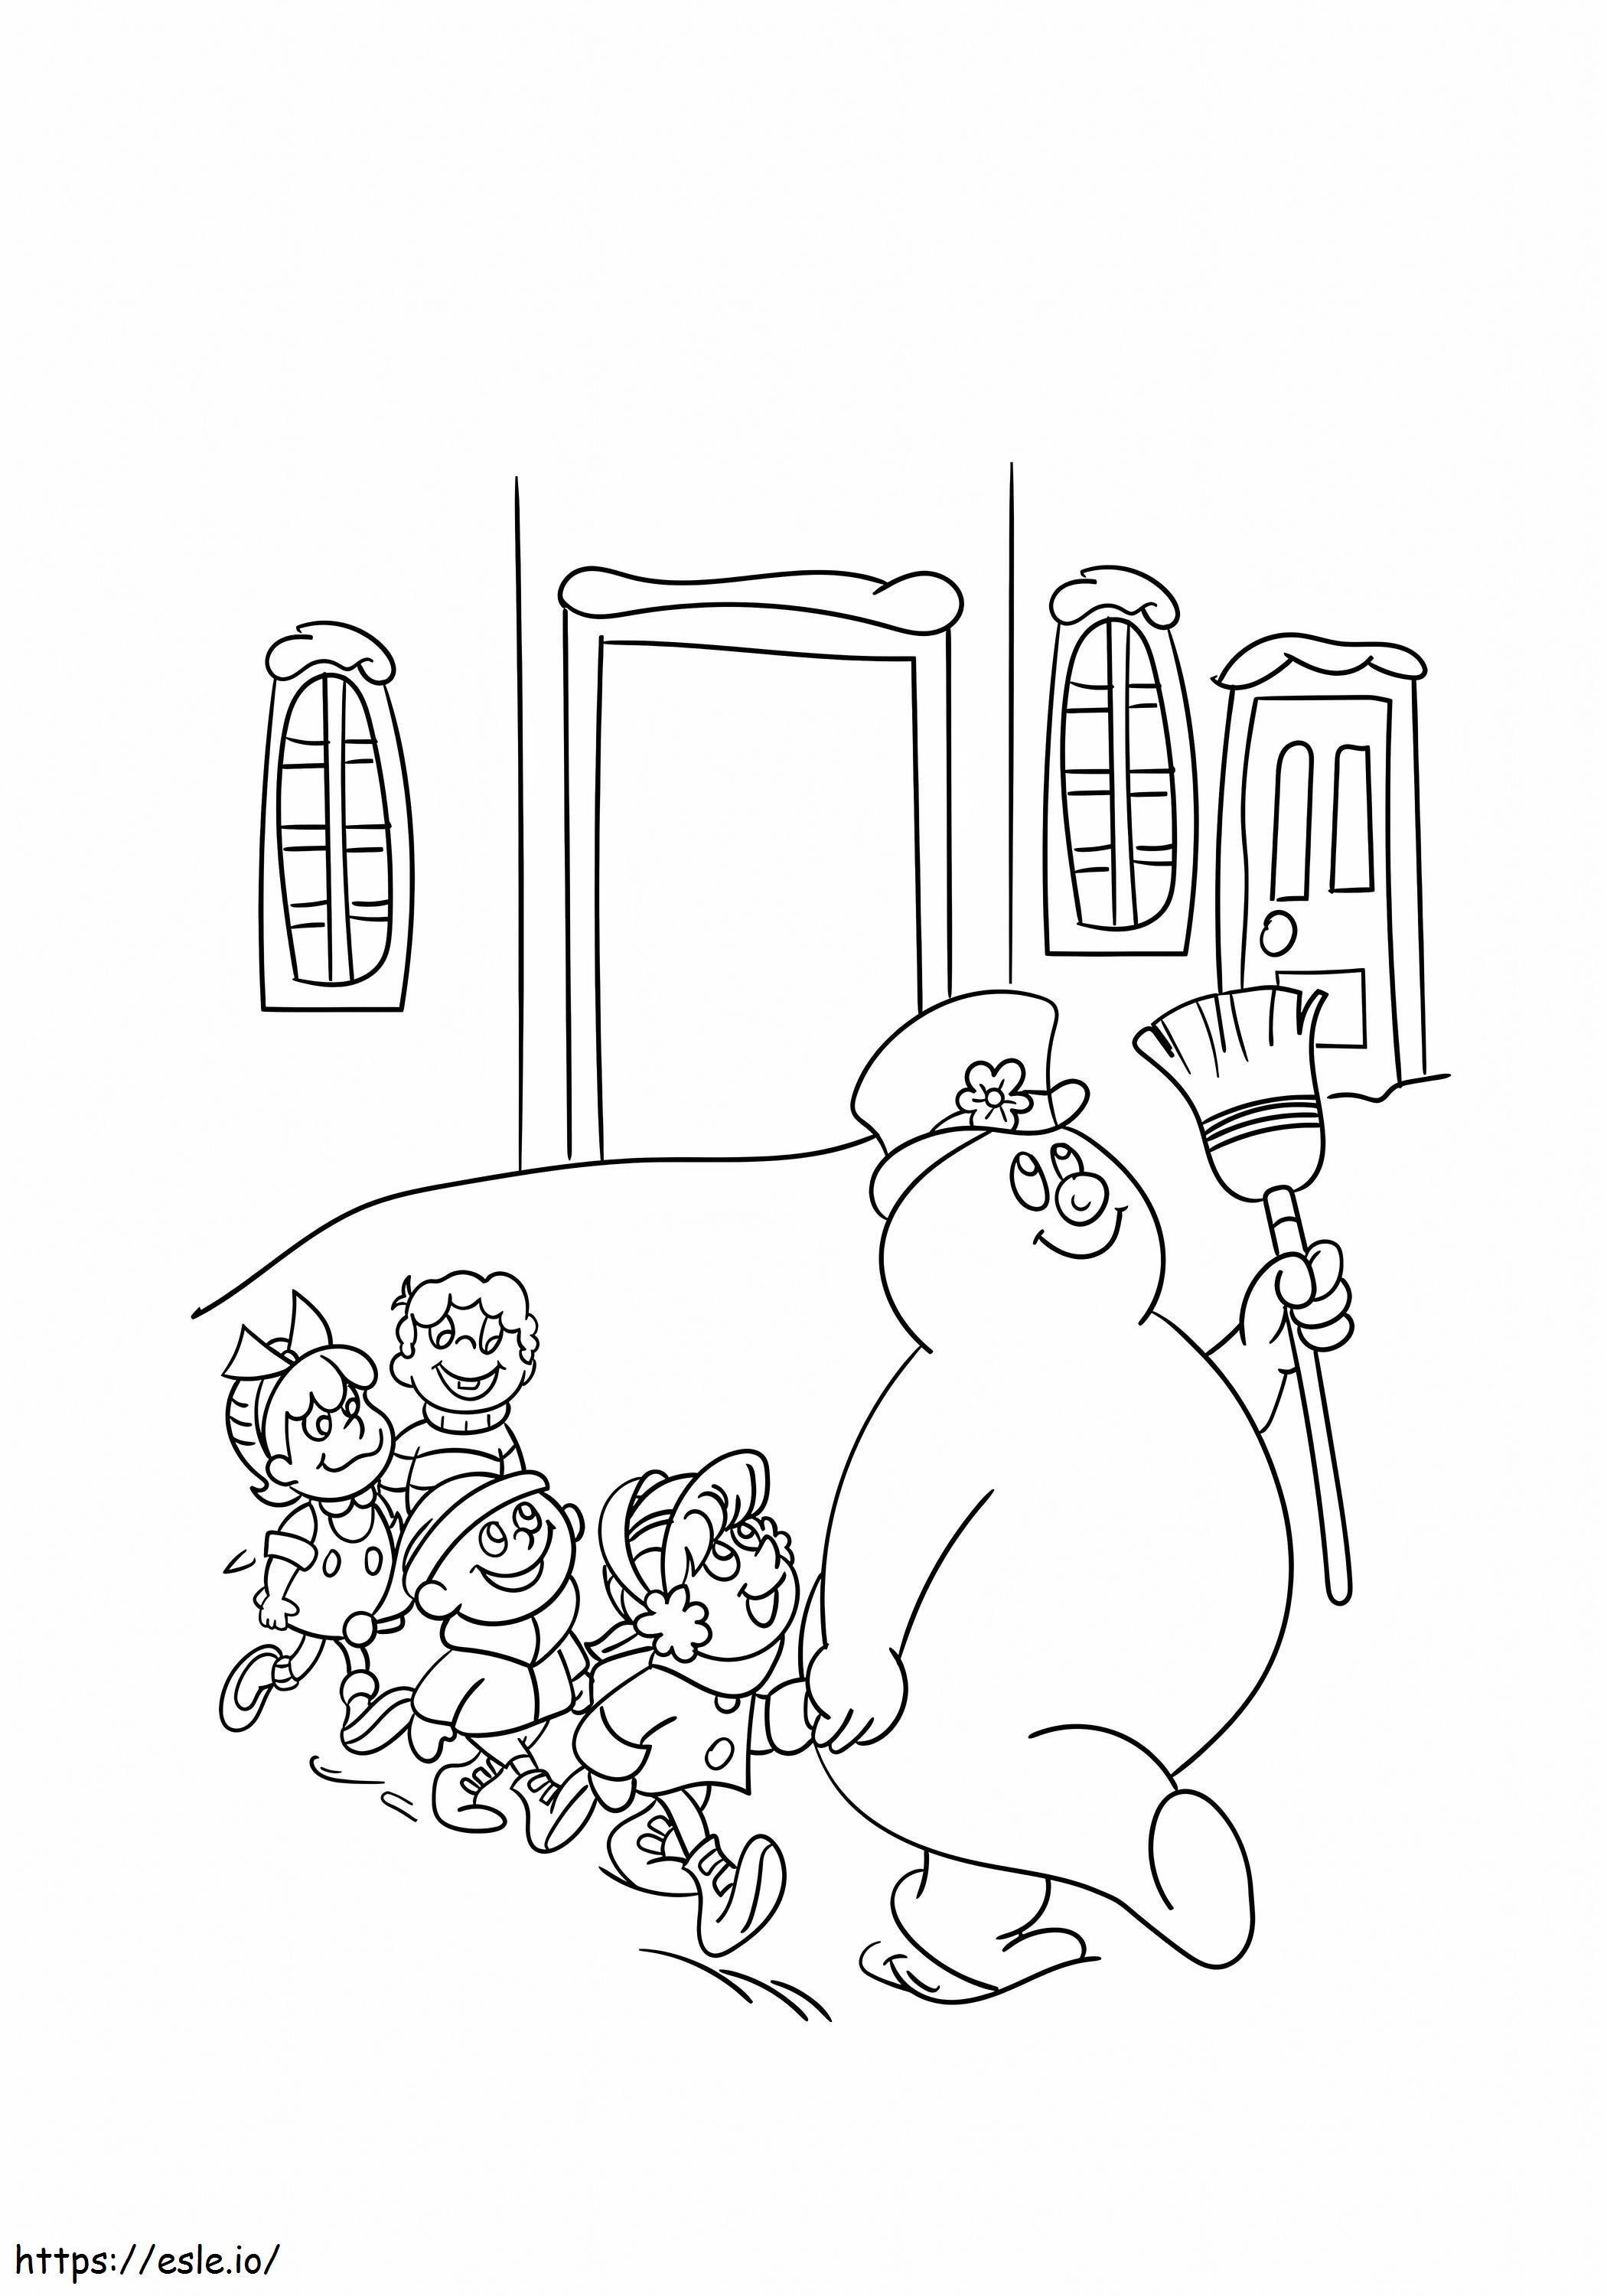 1526734703 Frosty Parading With The Kids 17 A4 coloring page